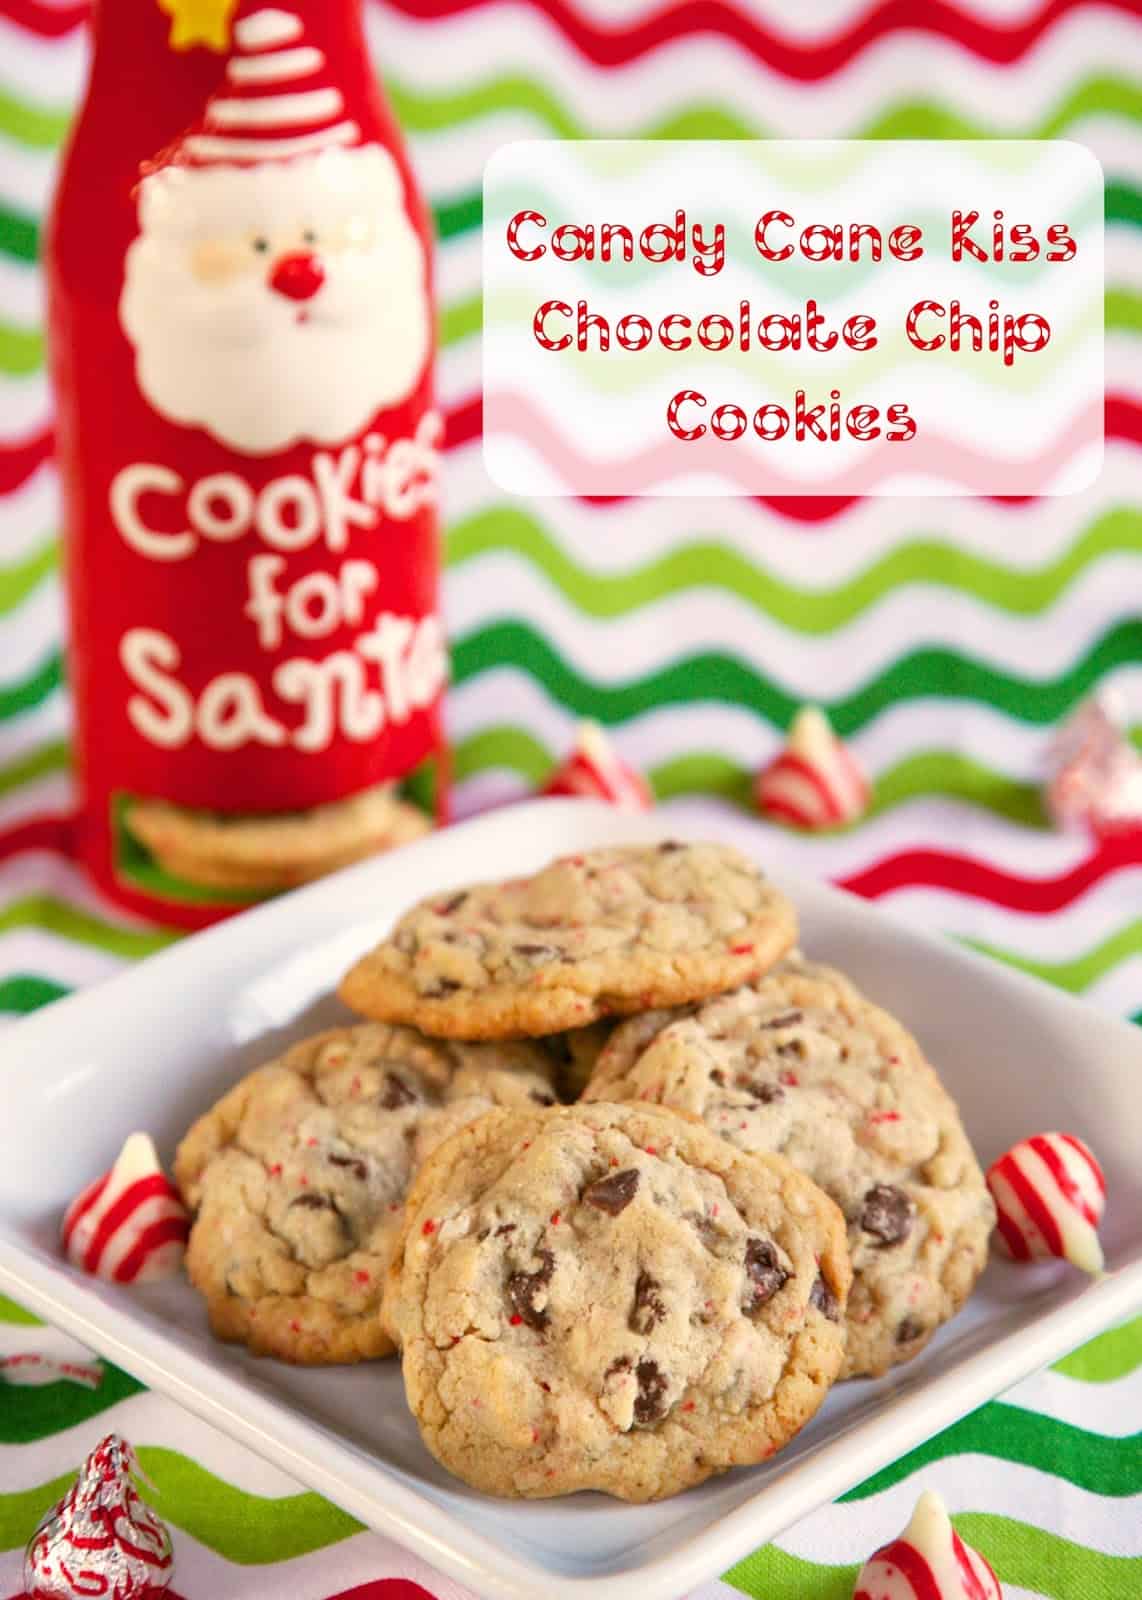 Candy Cane Kiss Chocolate Chip Cookies - chopped up candy cane kisses and chocolate chips combine to make a festive and delicious treat. Great addition to your holiday cookie tray! Everyone always asks for the recipe!!! A delicious holiday cookie recipe!